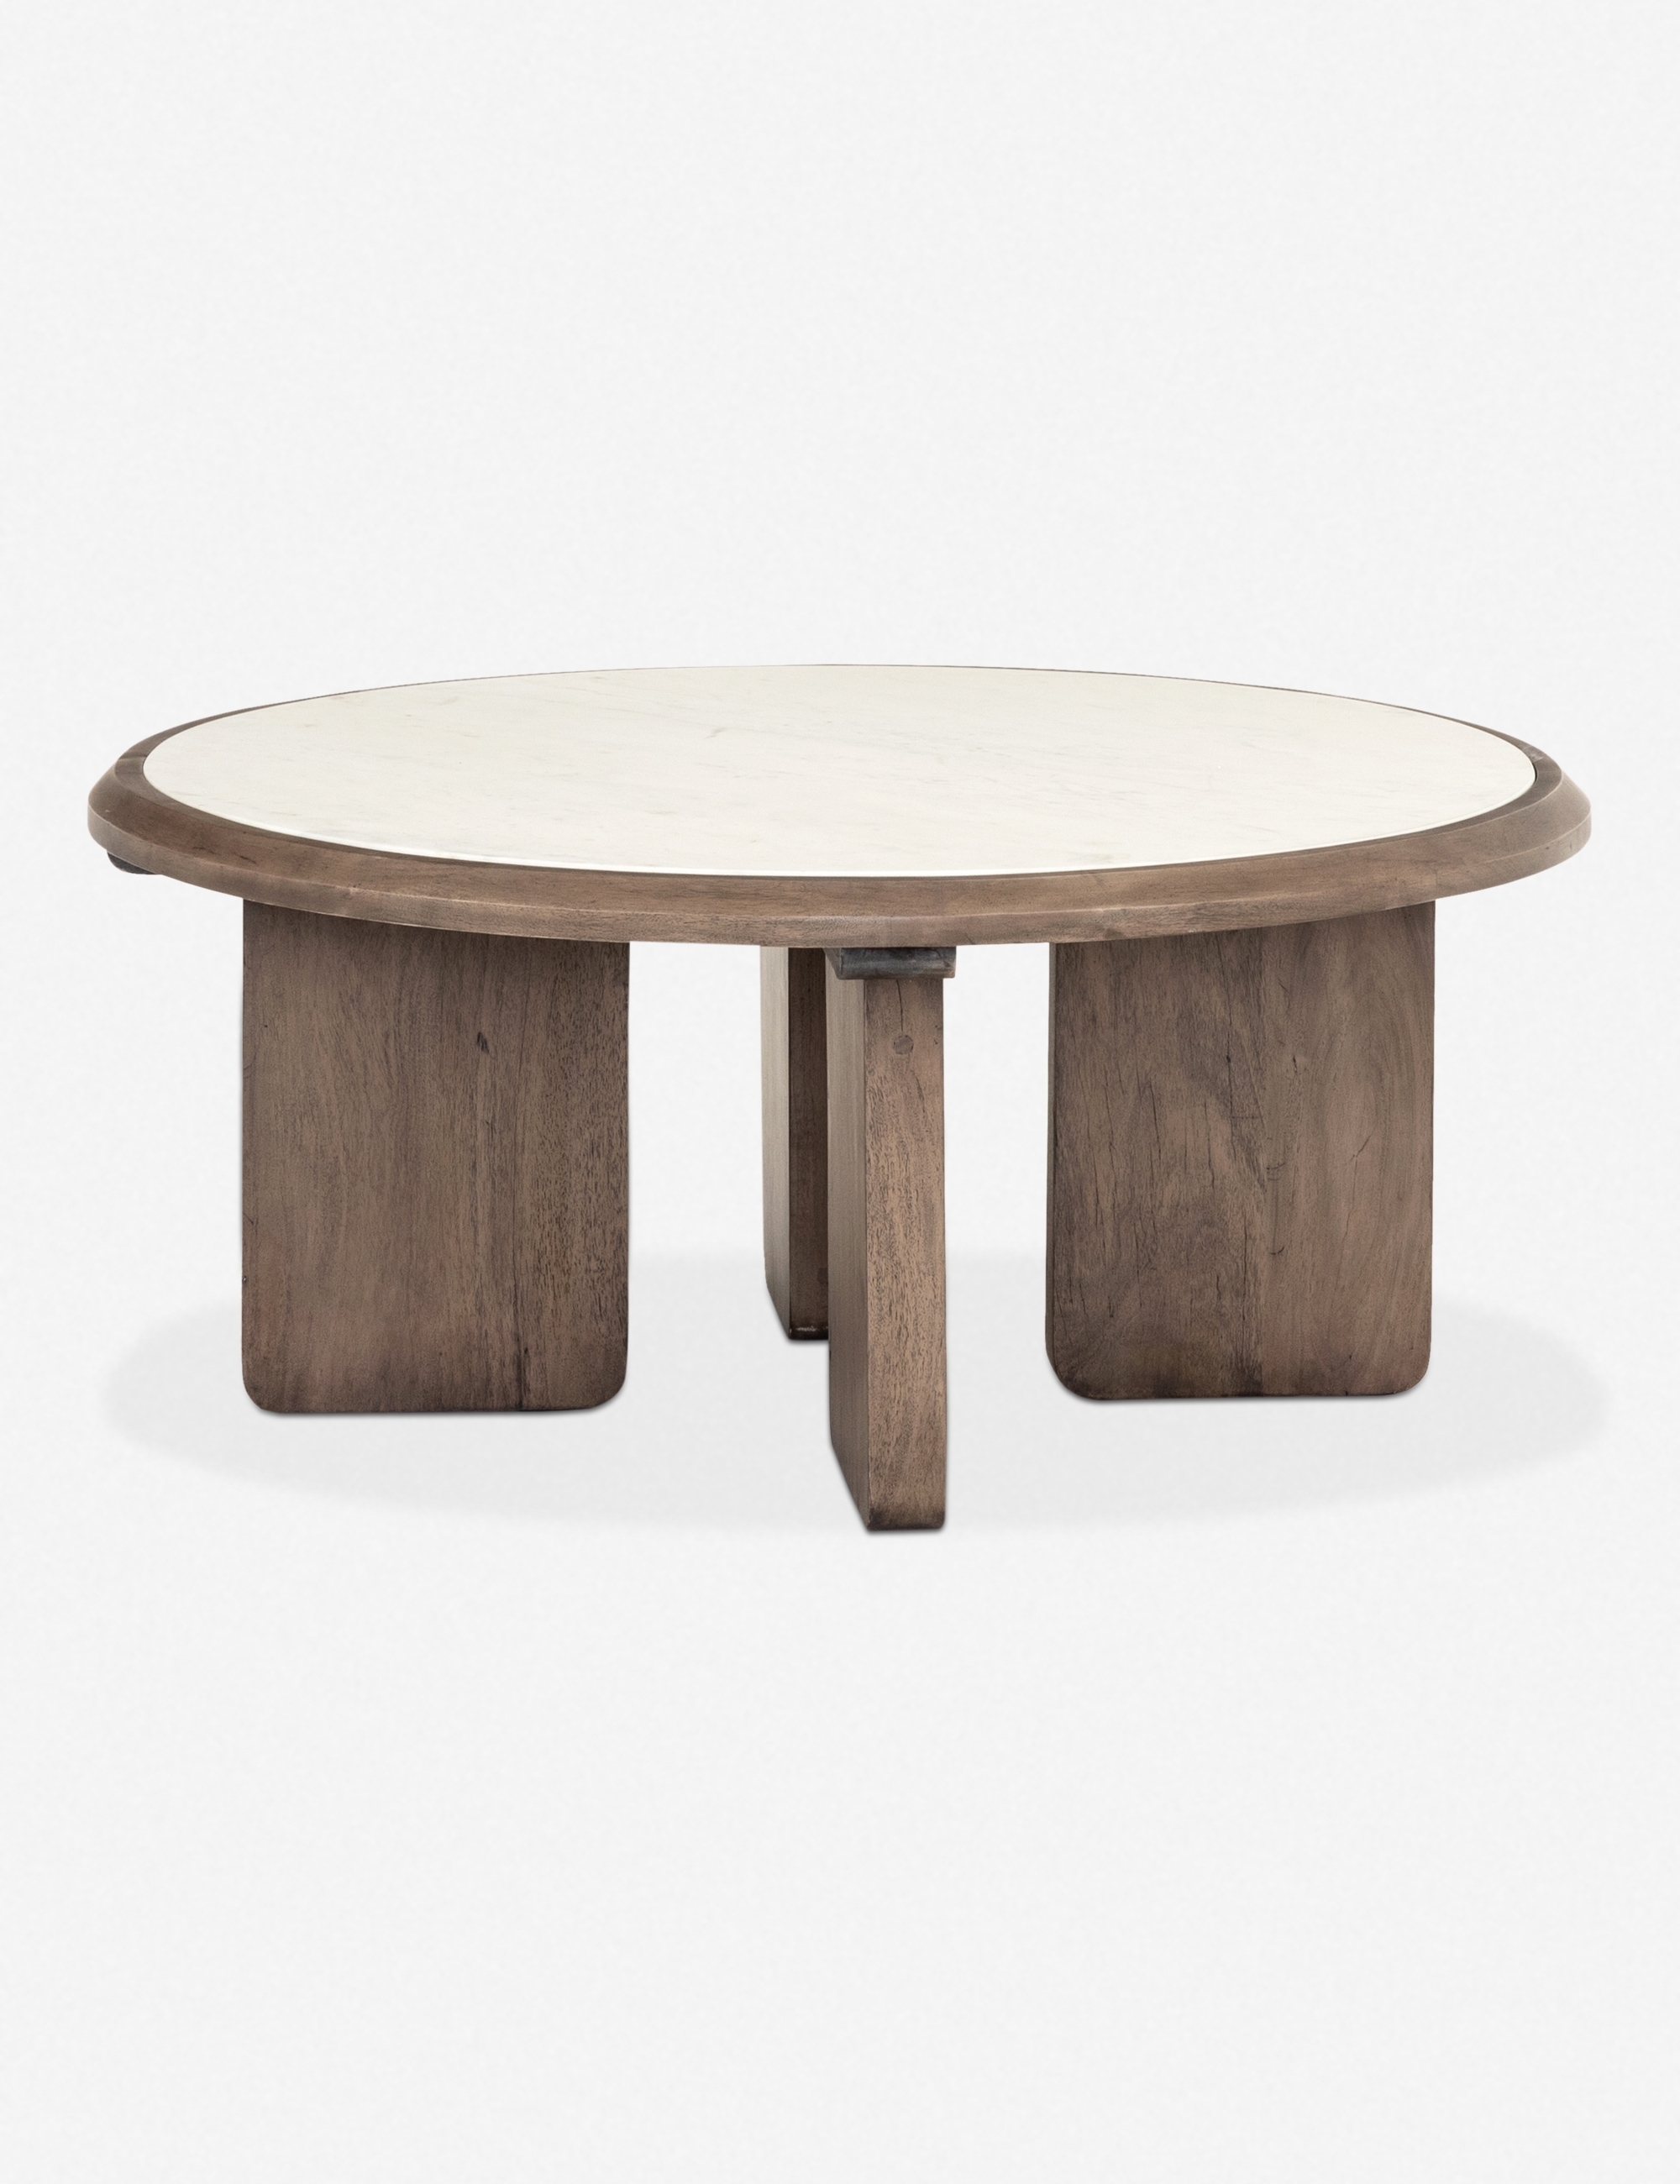 Lido Round Coffee Table - Image 1